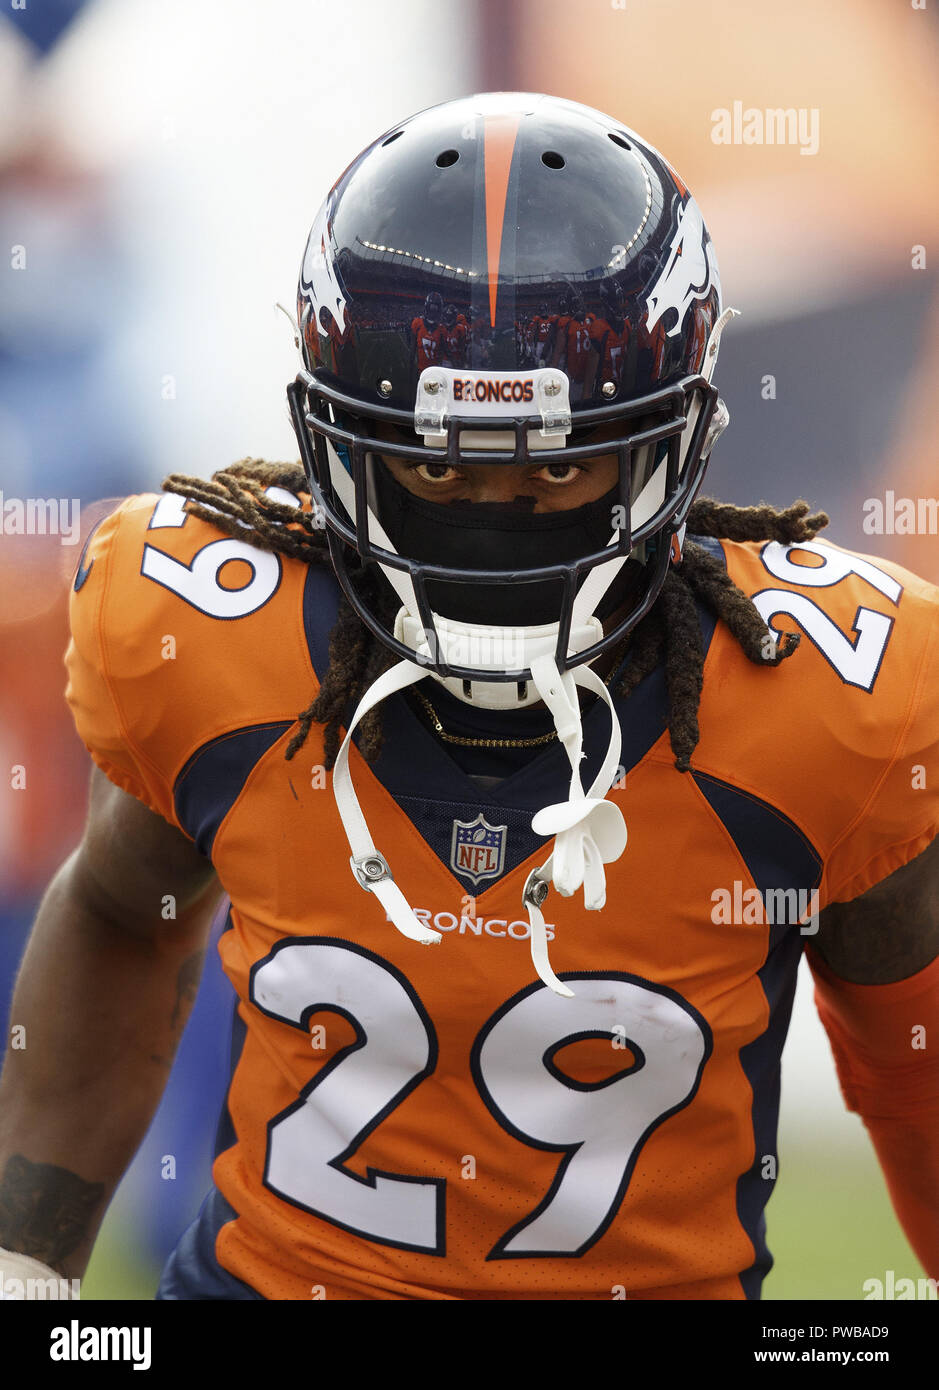 Denver, Colorado, USA. 14th Oct, 2018. Broncos CB BRADLEY ROBY comes on to the field at the start of player introductions before the start of the 1st. Half at Broncos Stadium at Mile High Sunday afternoon. The Rams beat the Broncos 23-20. Credit: Hector Acevedo/ZUMA Wire/Alamy Live News Stock Photo